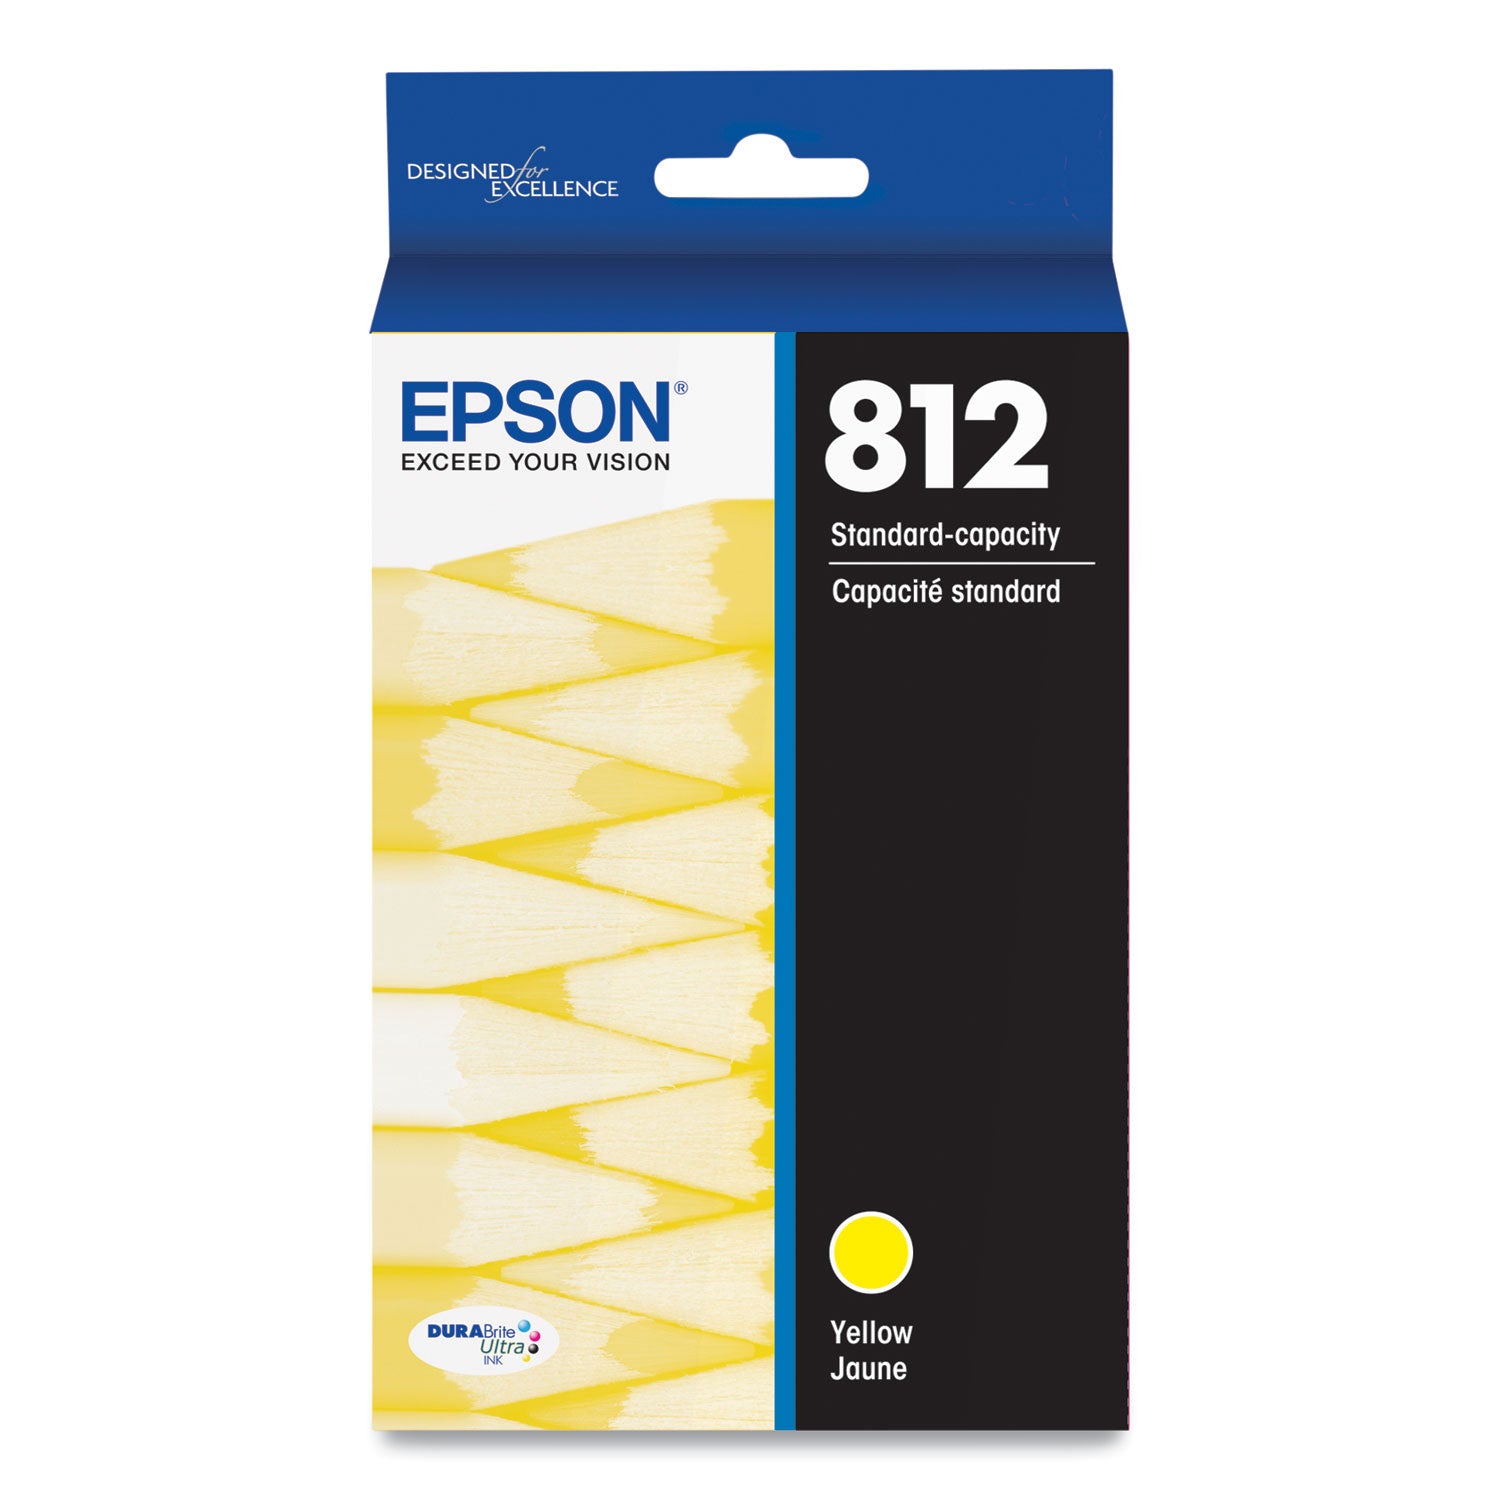 t812420-s-t812-durabrite-ultra-ink-300-page-yield-yellow_epst812420s - 1